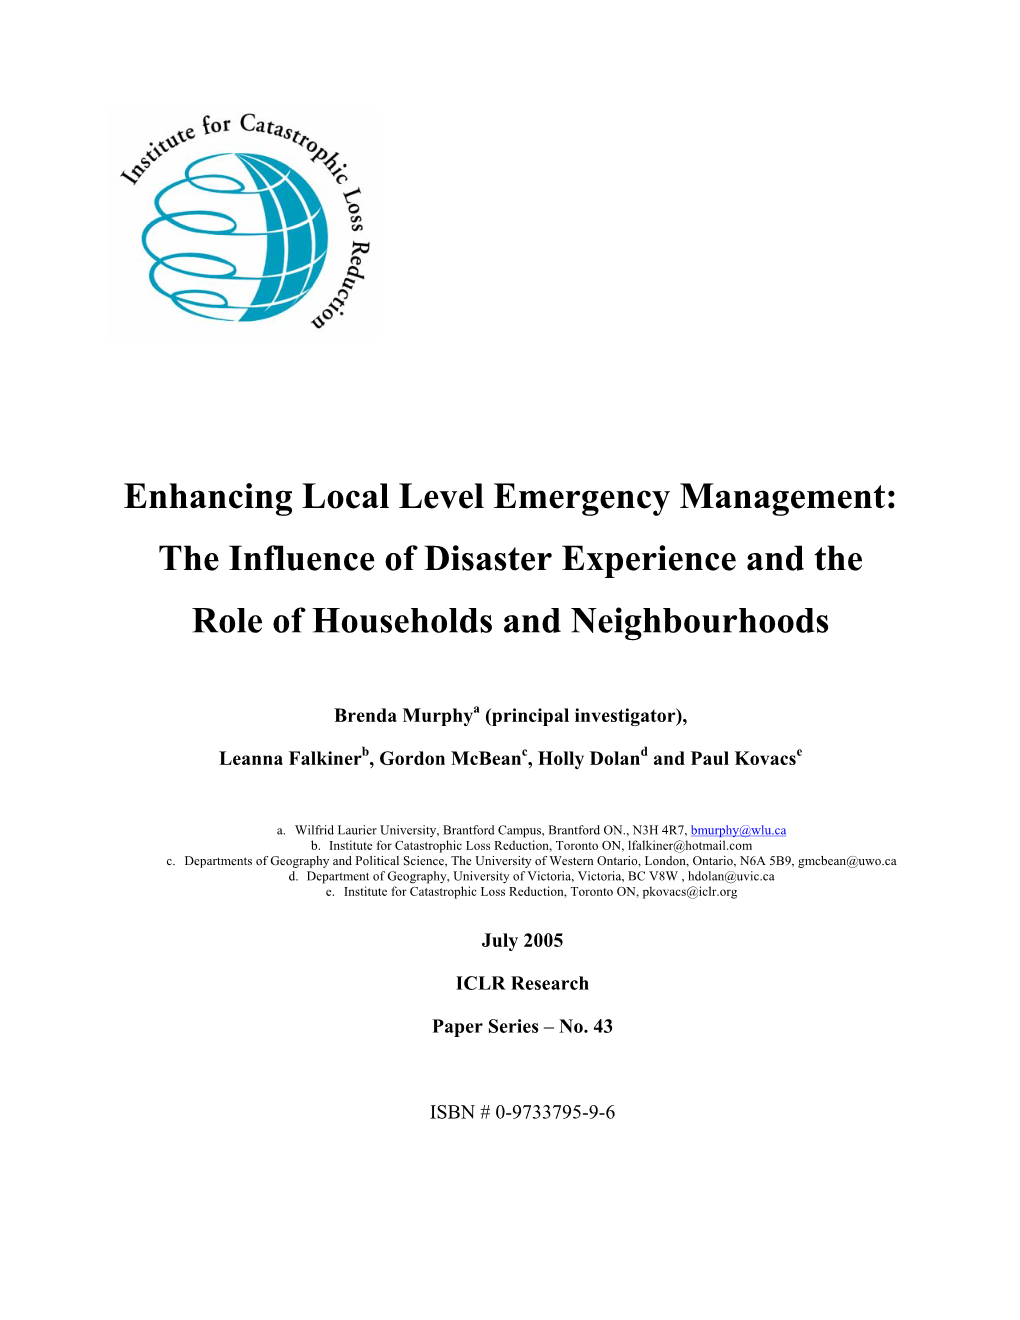 Enhancing Local Level Emergency Management: the Influence of Disaster Experience and the Role of Households and Neighbourhoods